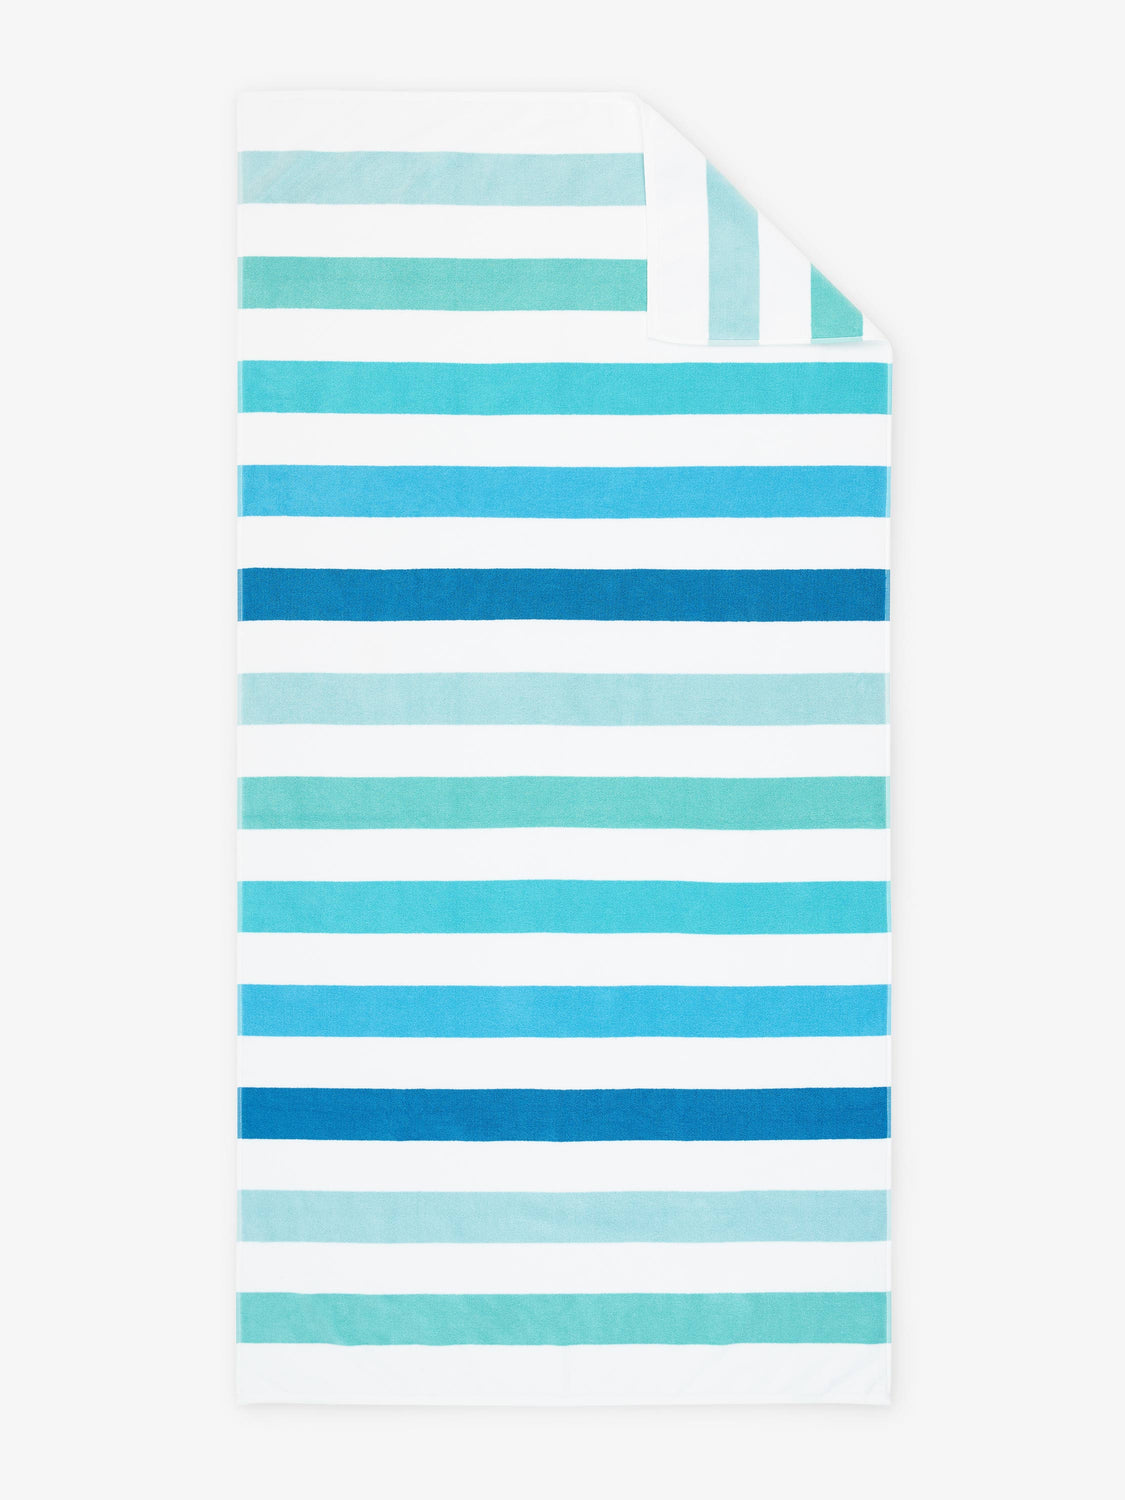 An oversized, striped cabana beach towel with shades of blue and green laid out.